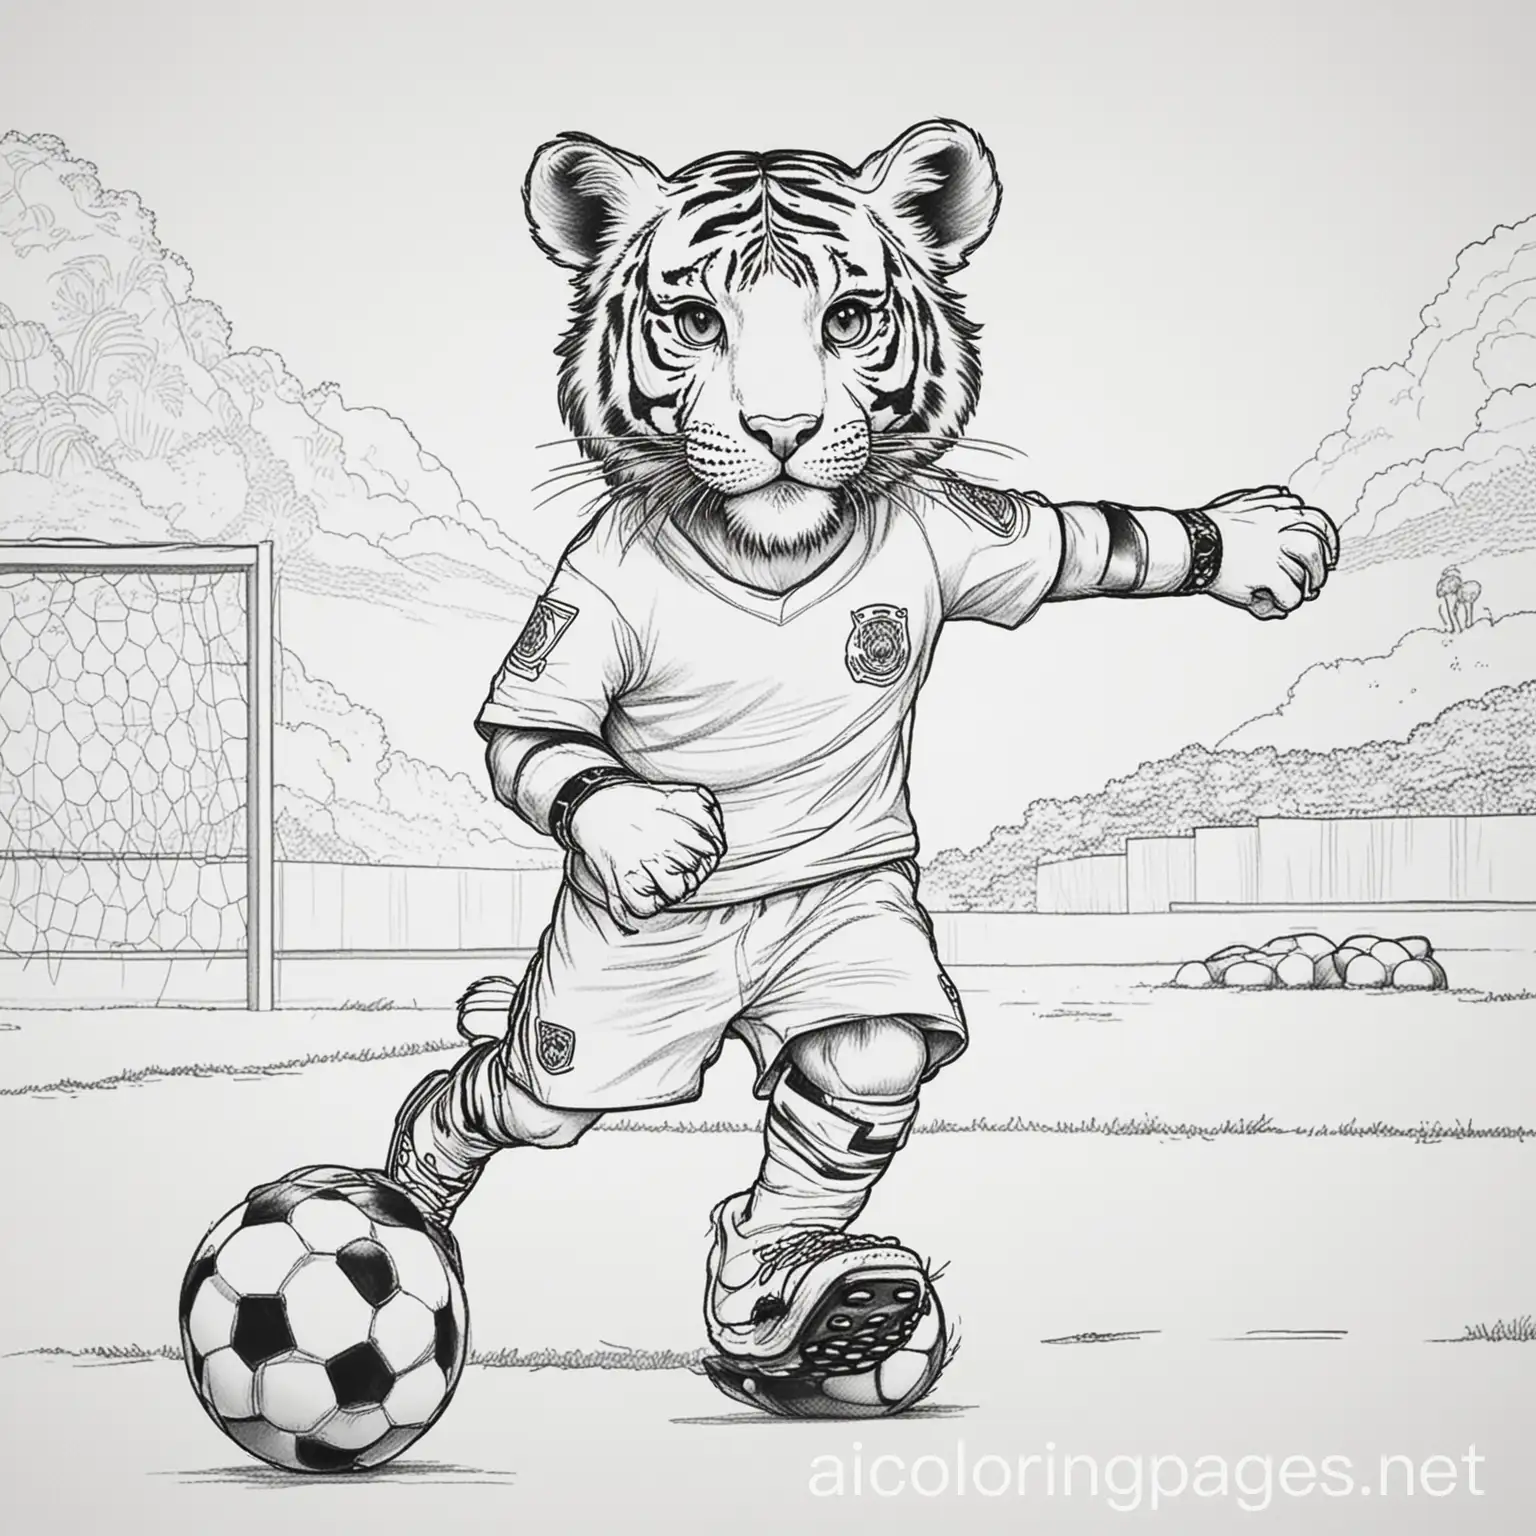 Tiger-Playing-Soccer-in-MexicanThemed-Coloring-Page-for-Kids